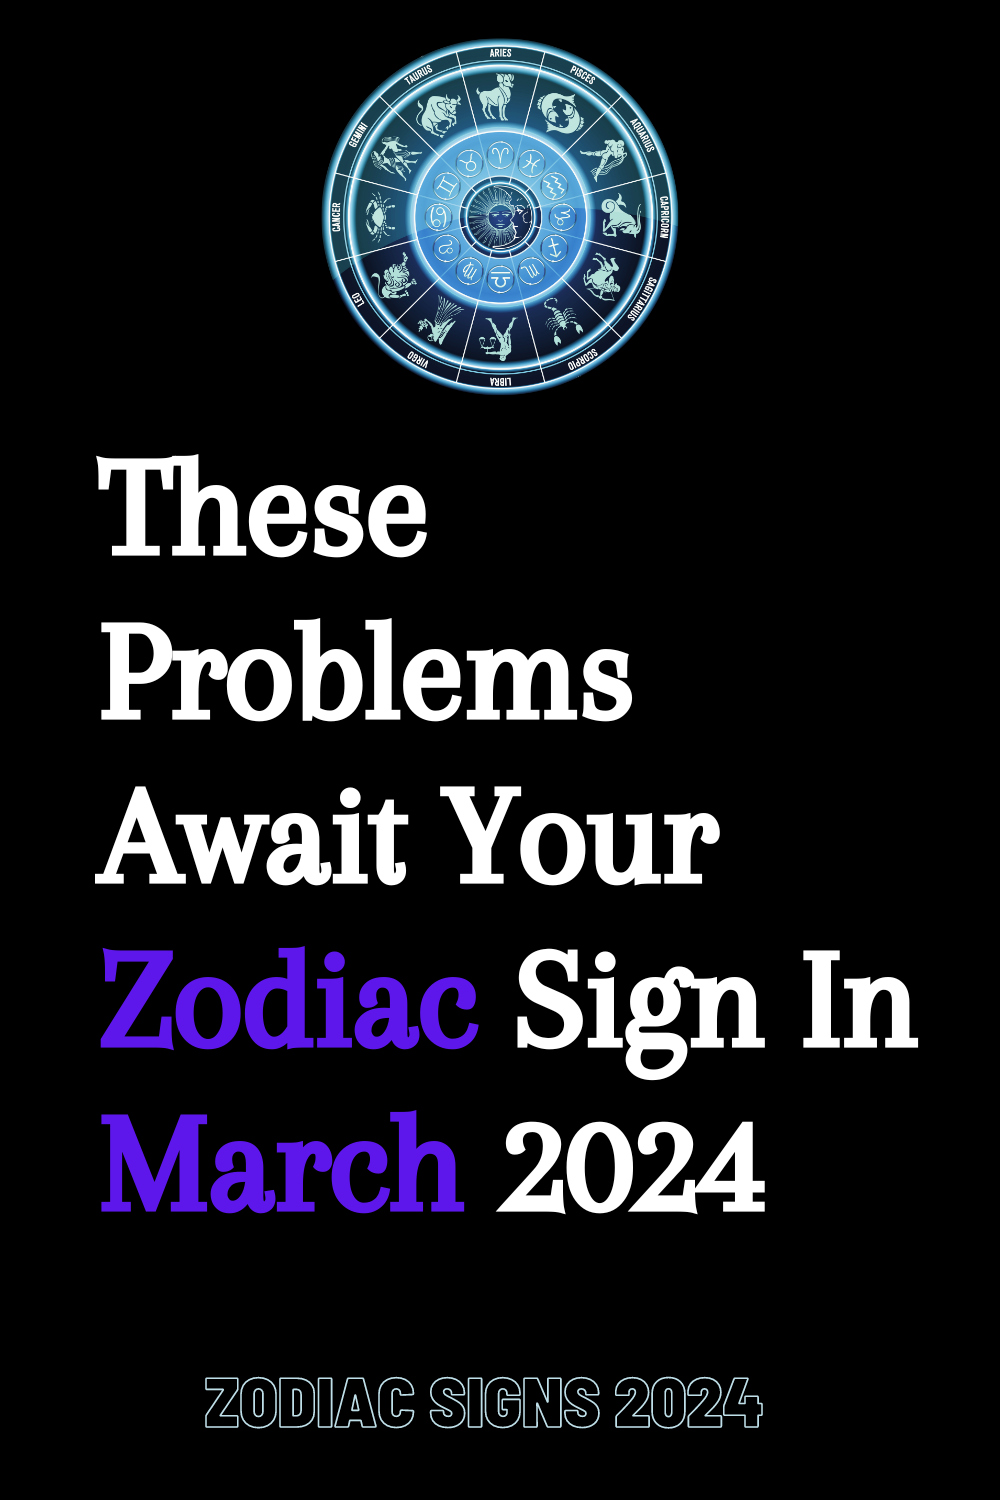 These Problems Await Your Zodiac Sign In March 2024